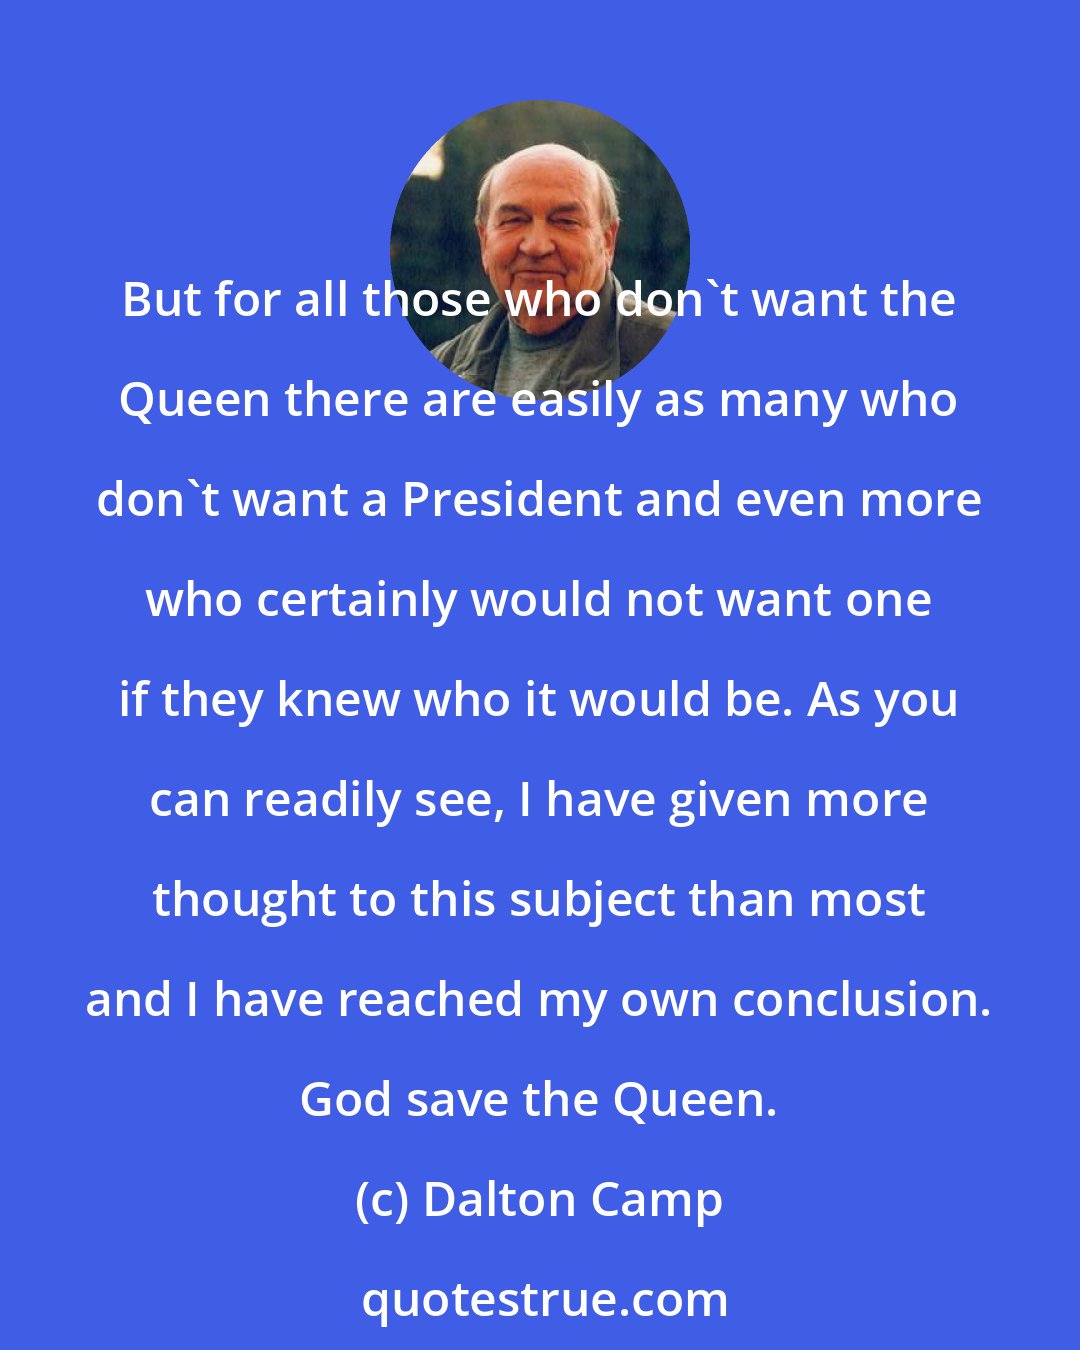 Dalton Camp: But for all those who don't want the Queen there are easily as many who don't want a President and even more who certainly would not want one if they knew who it would be. As you can readily see, I have given more thought to this subject than most and I have reached my own conclusion. God save the Queen.